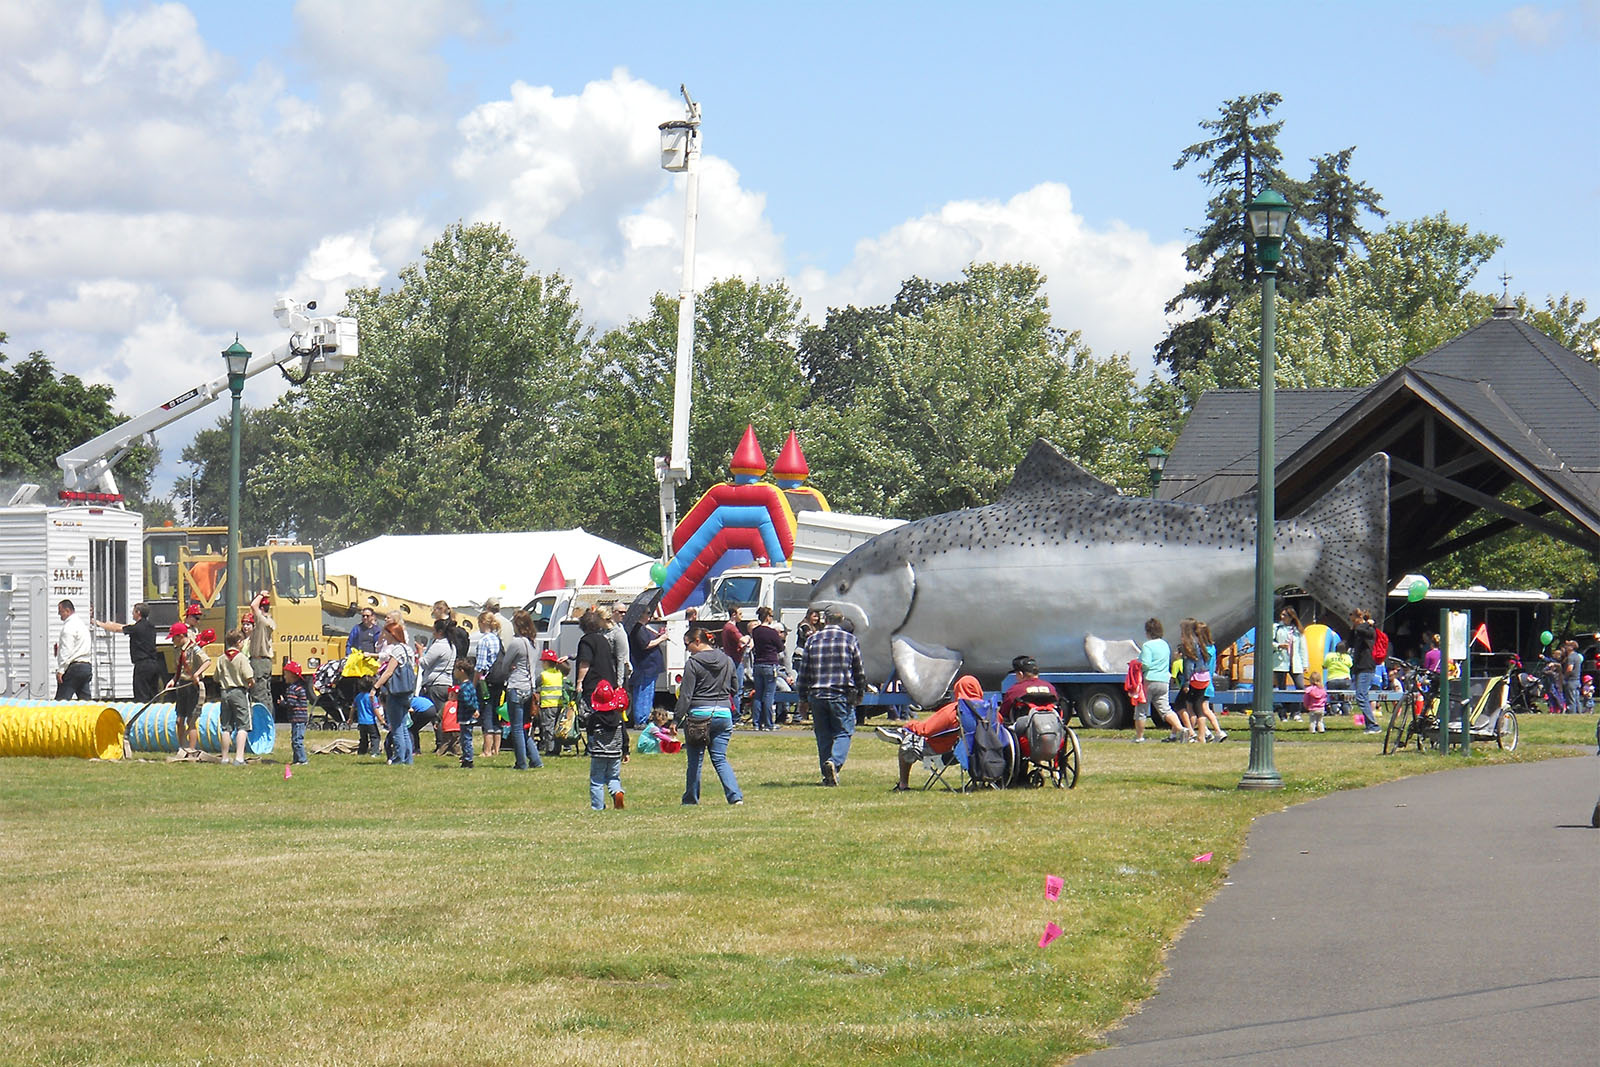 public works day 2016 people and large salmon